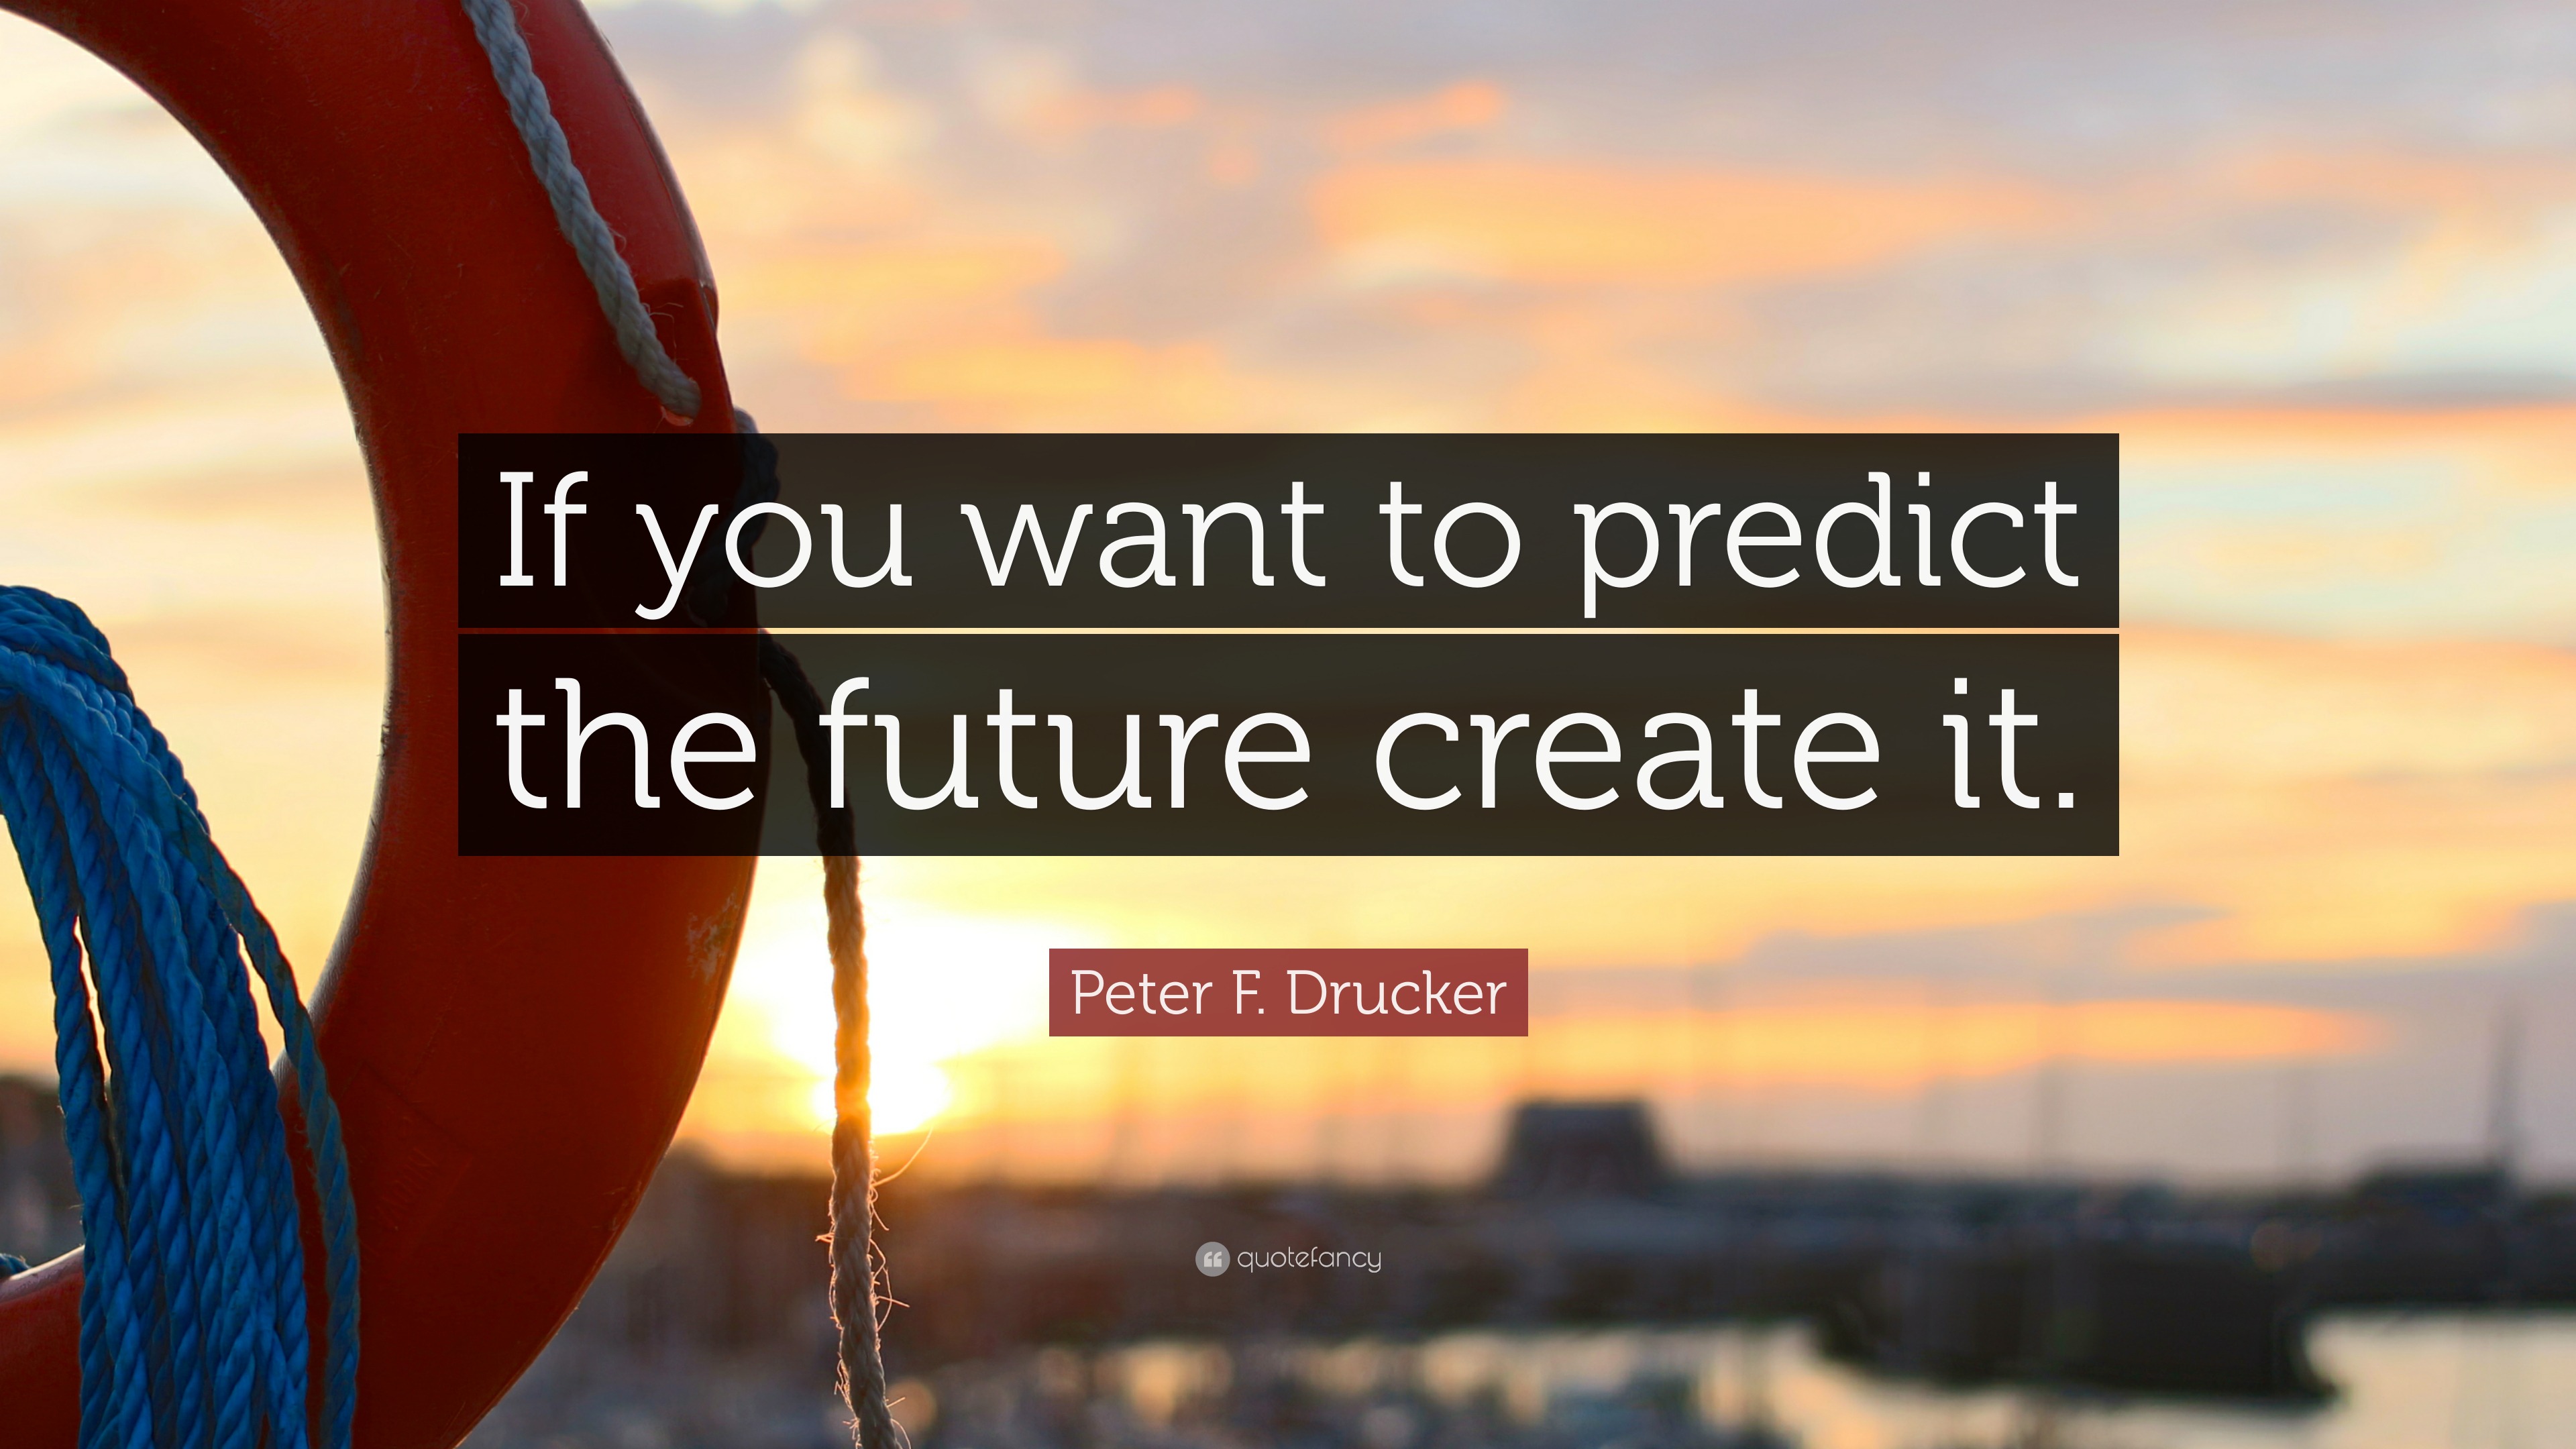 Peter F Drucker Quote “if You Want To Predict The Future Create It”